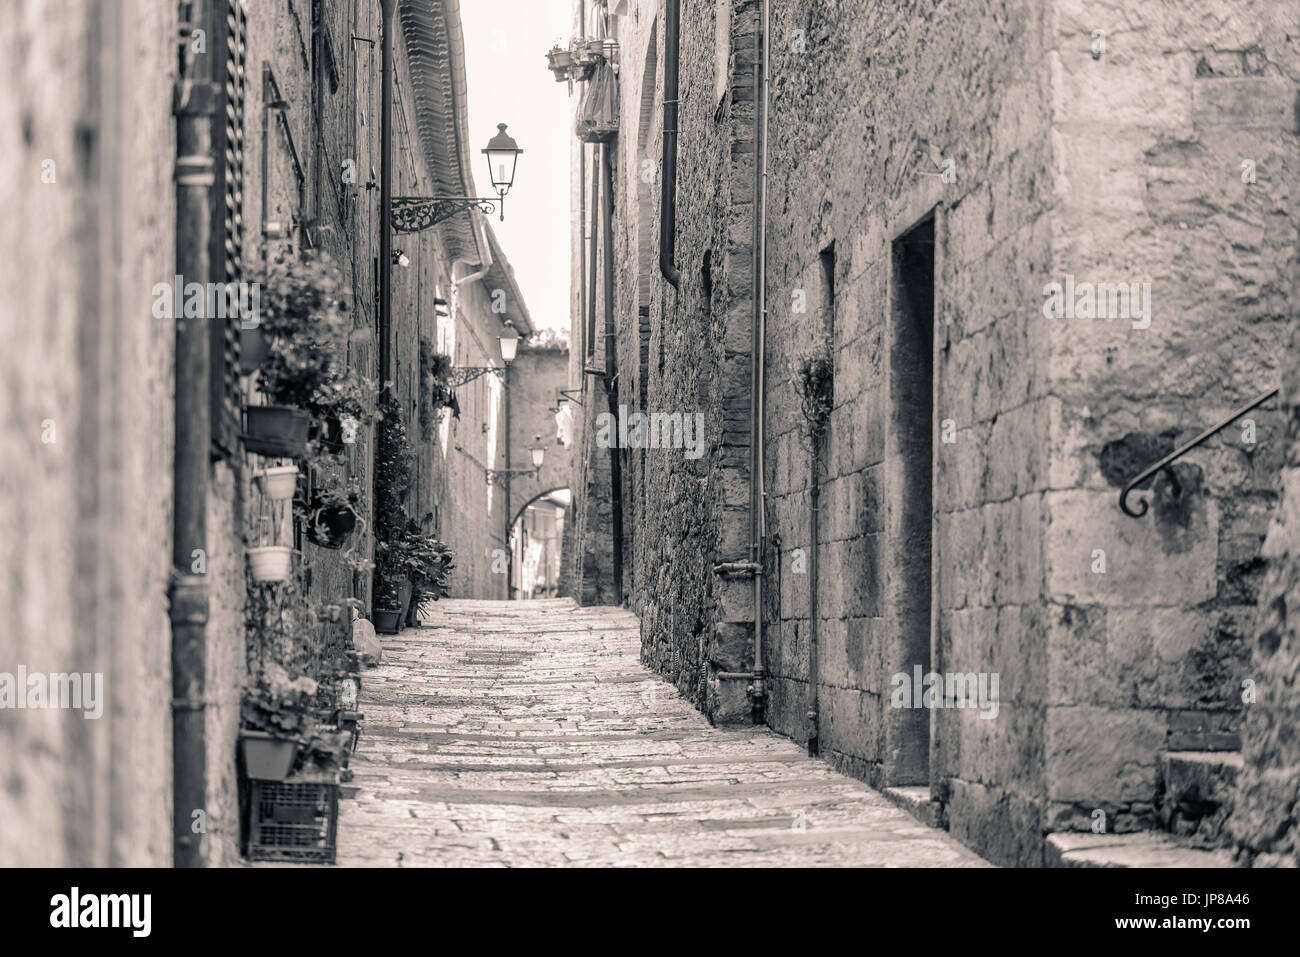 View of an alley in the historic district of Colle Val d'Elsa a small town near Siena in Tuscany Stock Photo